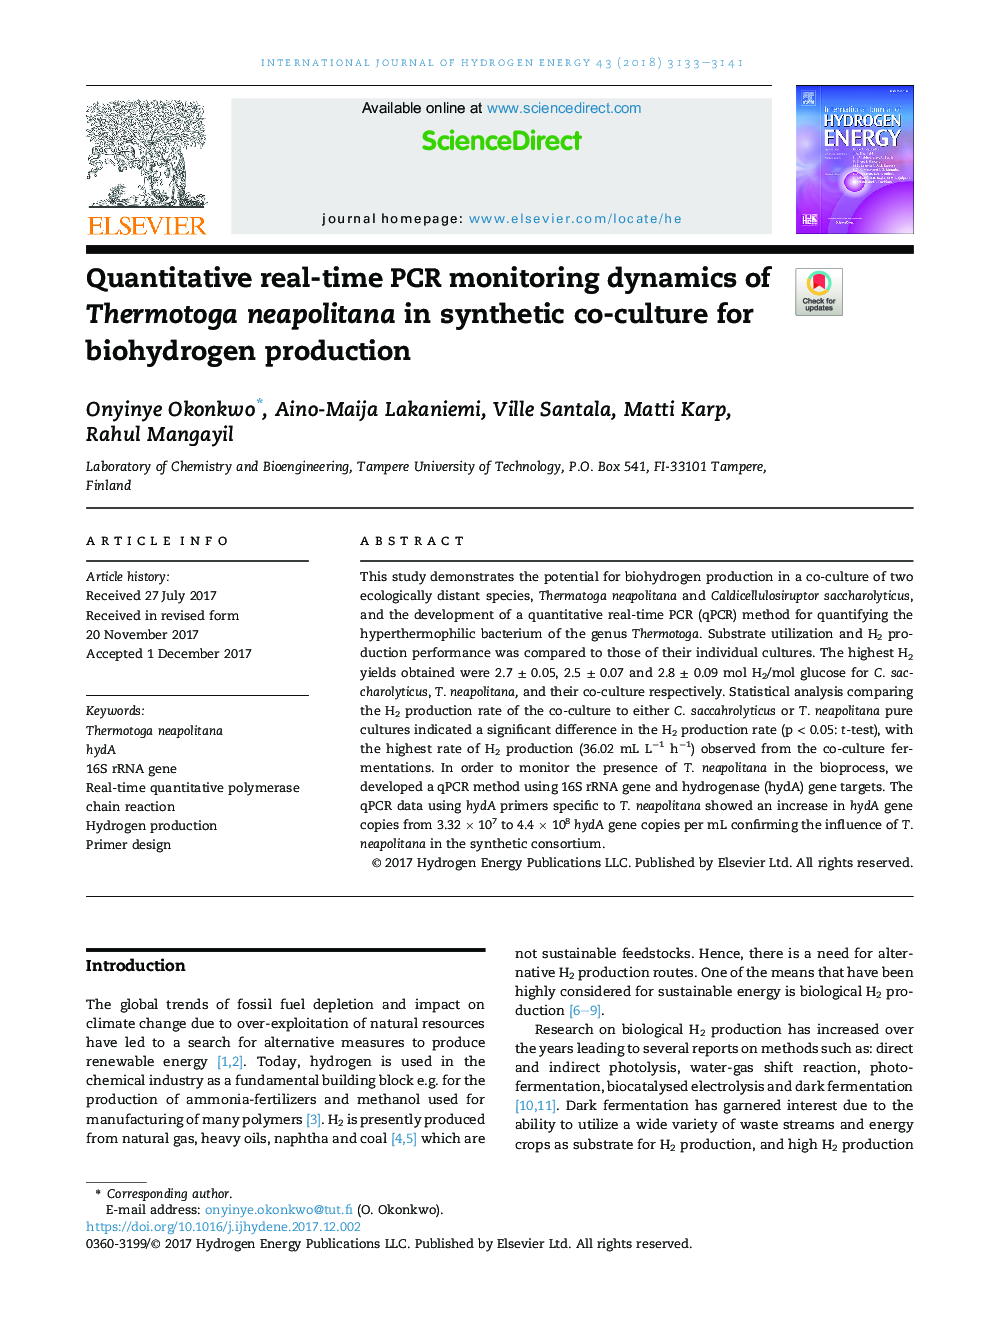 Quantitative real-time PCR monitoring dynamics of Thermotoga neapolitana in synthetic co-culture for biohydrogen production